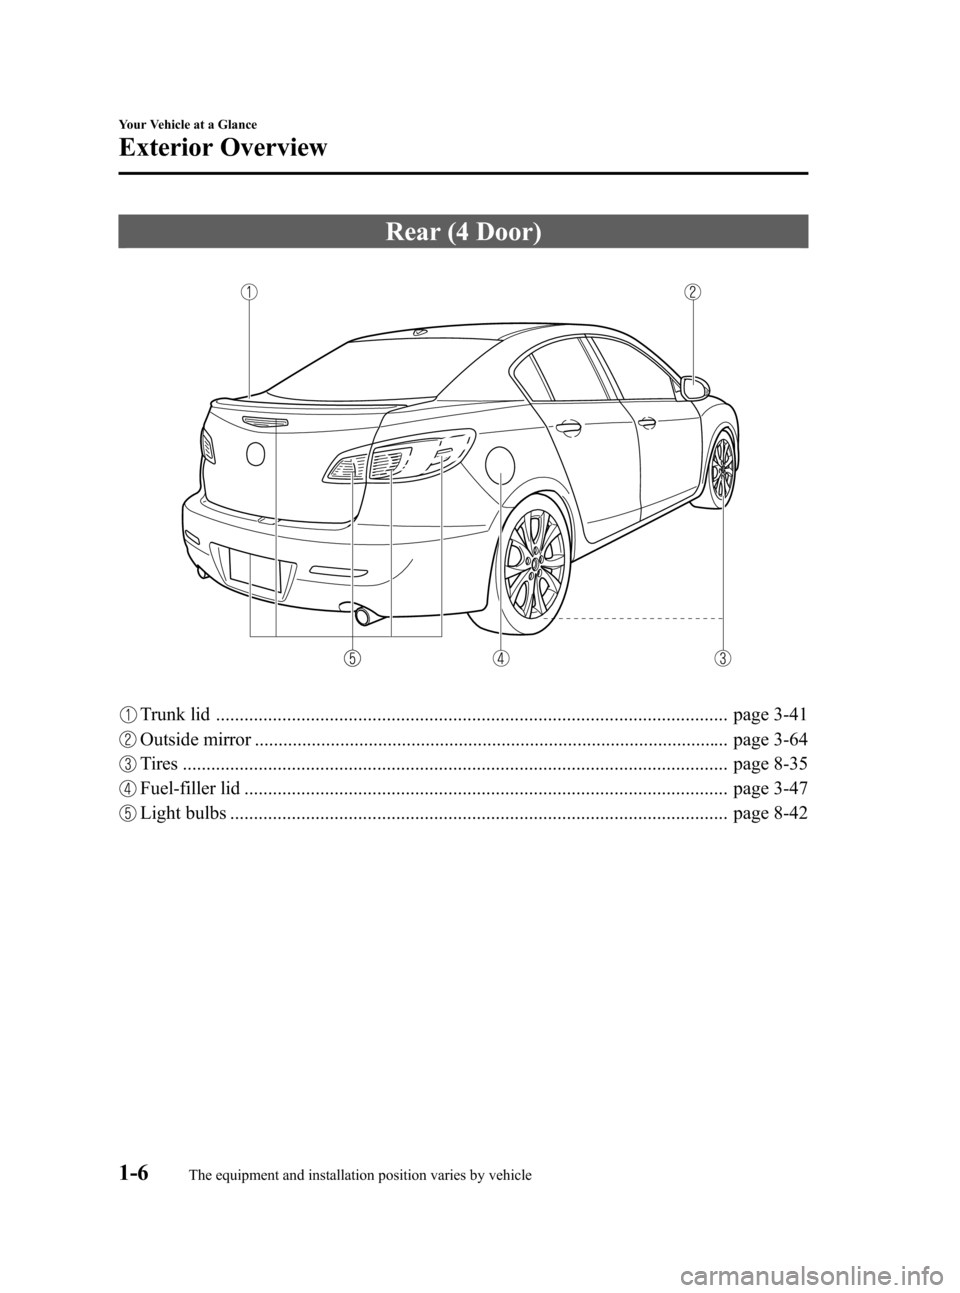 MAZDA MODEL 3 HATCHBACK 2011  Owners Manual (in English) Black plate (12,1)
Rear (4 Door)
Trunk lid ............................................................................................................ page 3-41
Outside mirror .......................